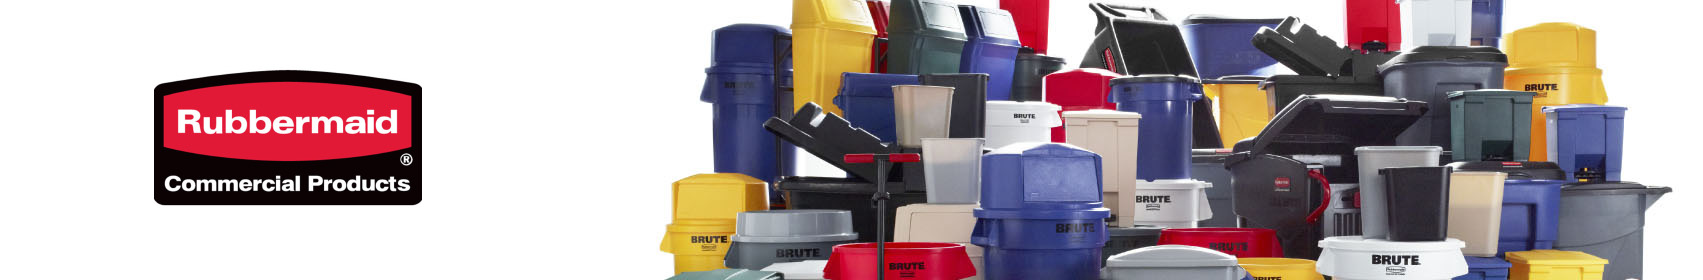 Rubbermaid Commercial Products Banner